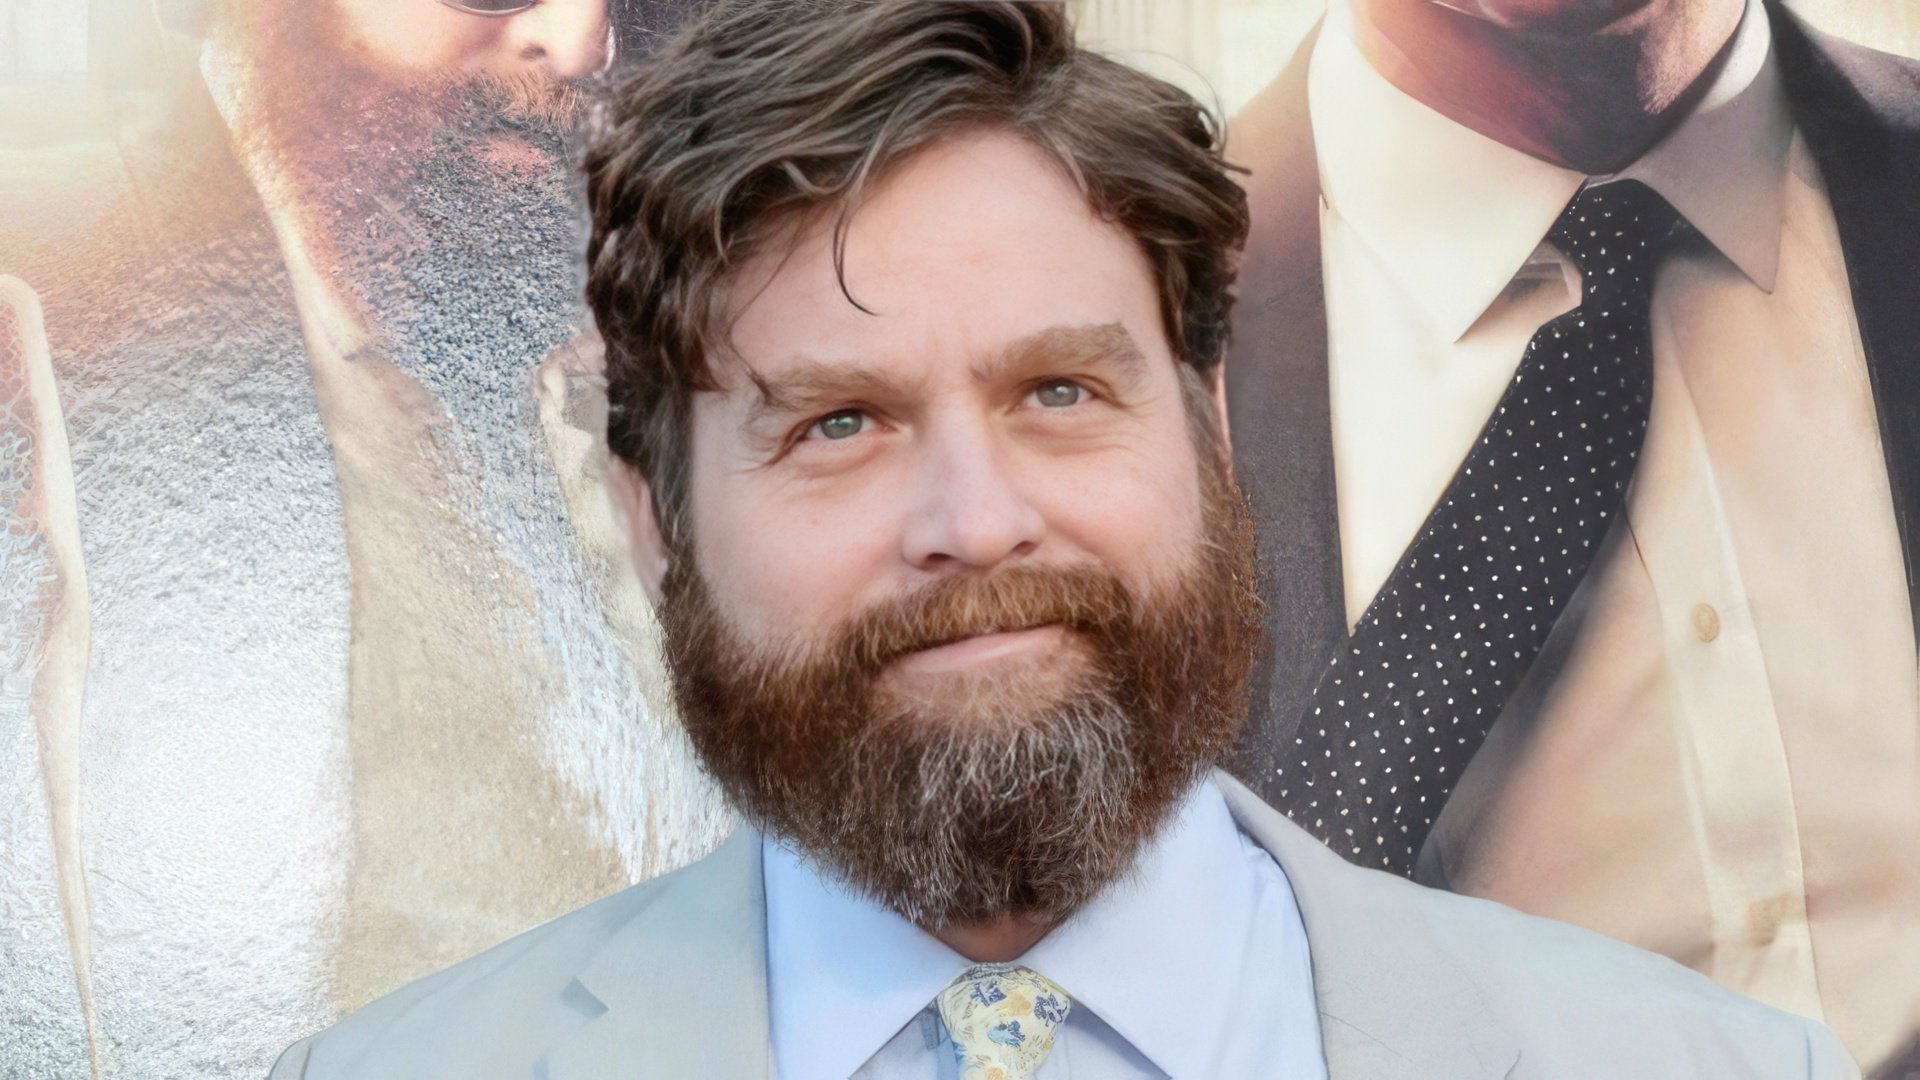 Zach Galifianakis Is the Most Famous Hollywood Bearded Man